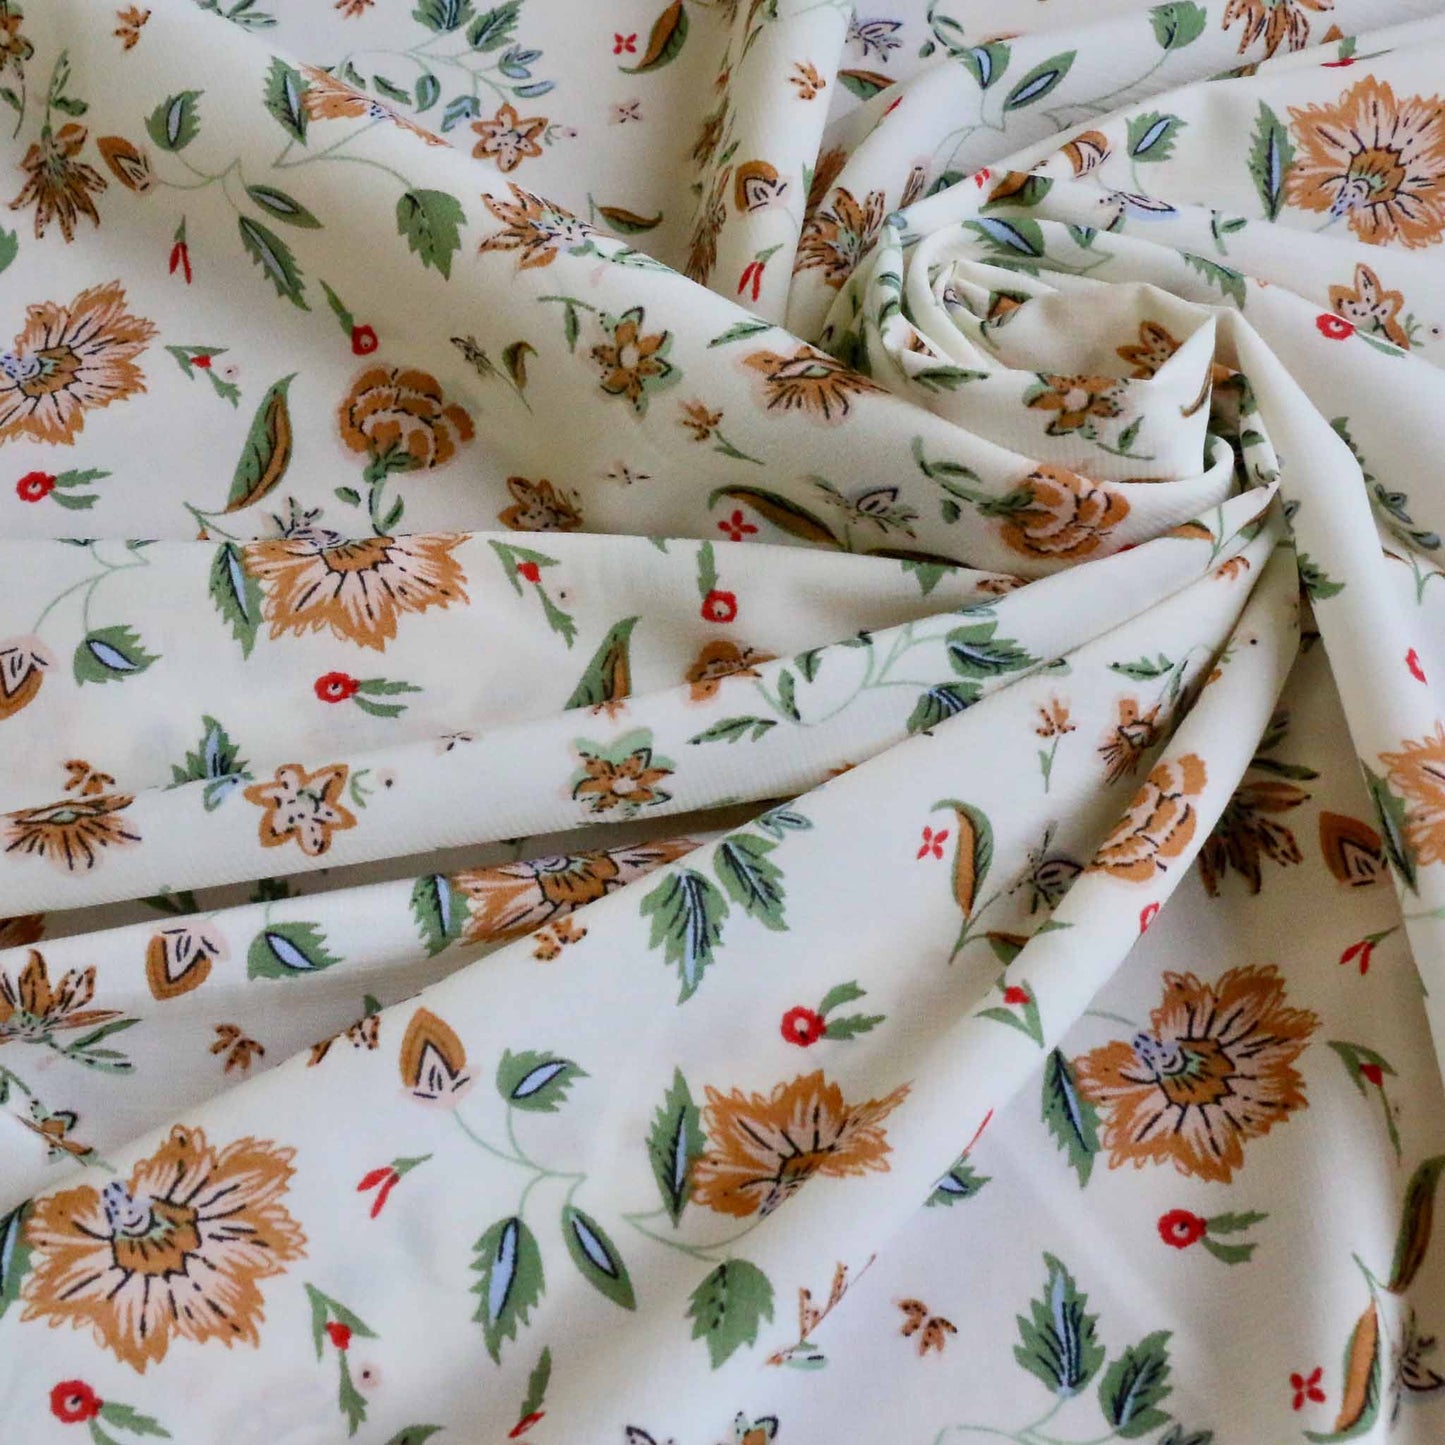 white stretchy chiffon dressmaking fabric with nature inspired floral print